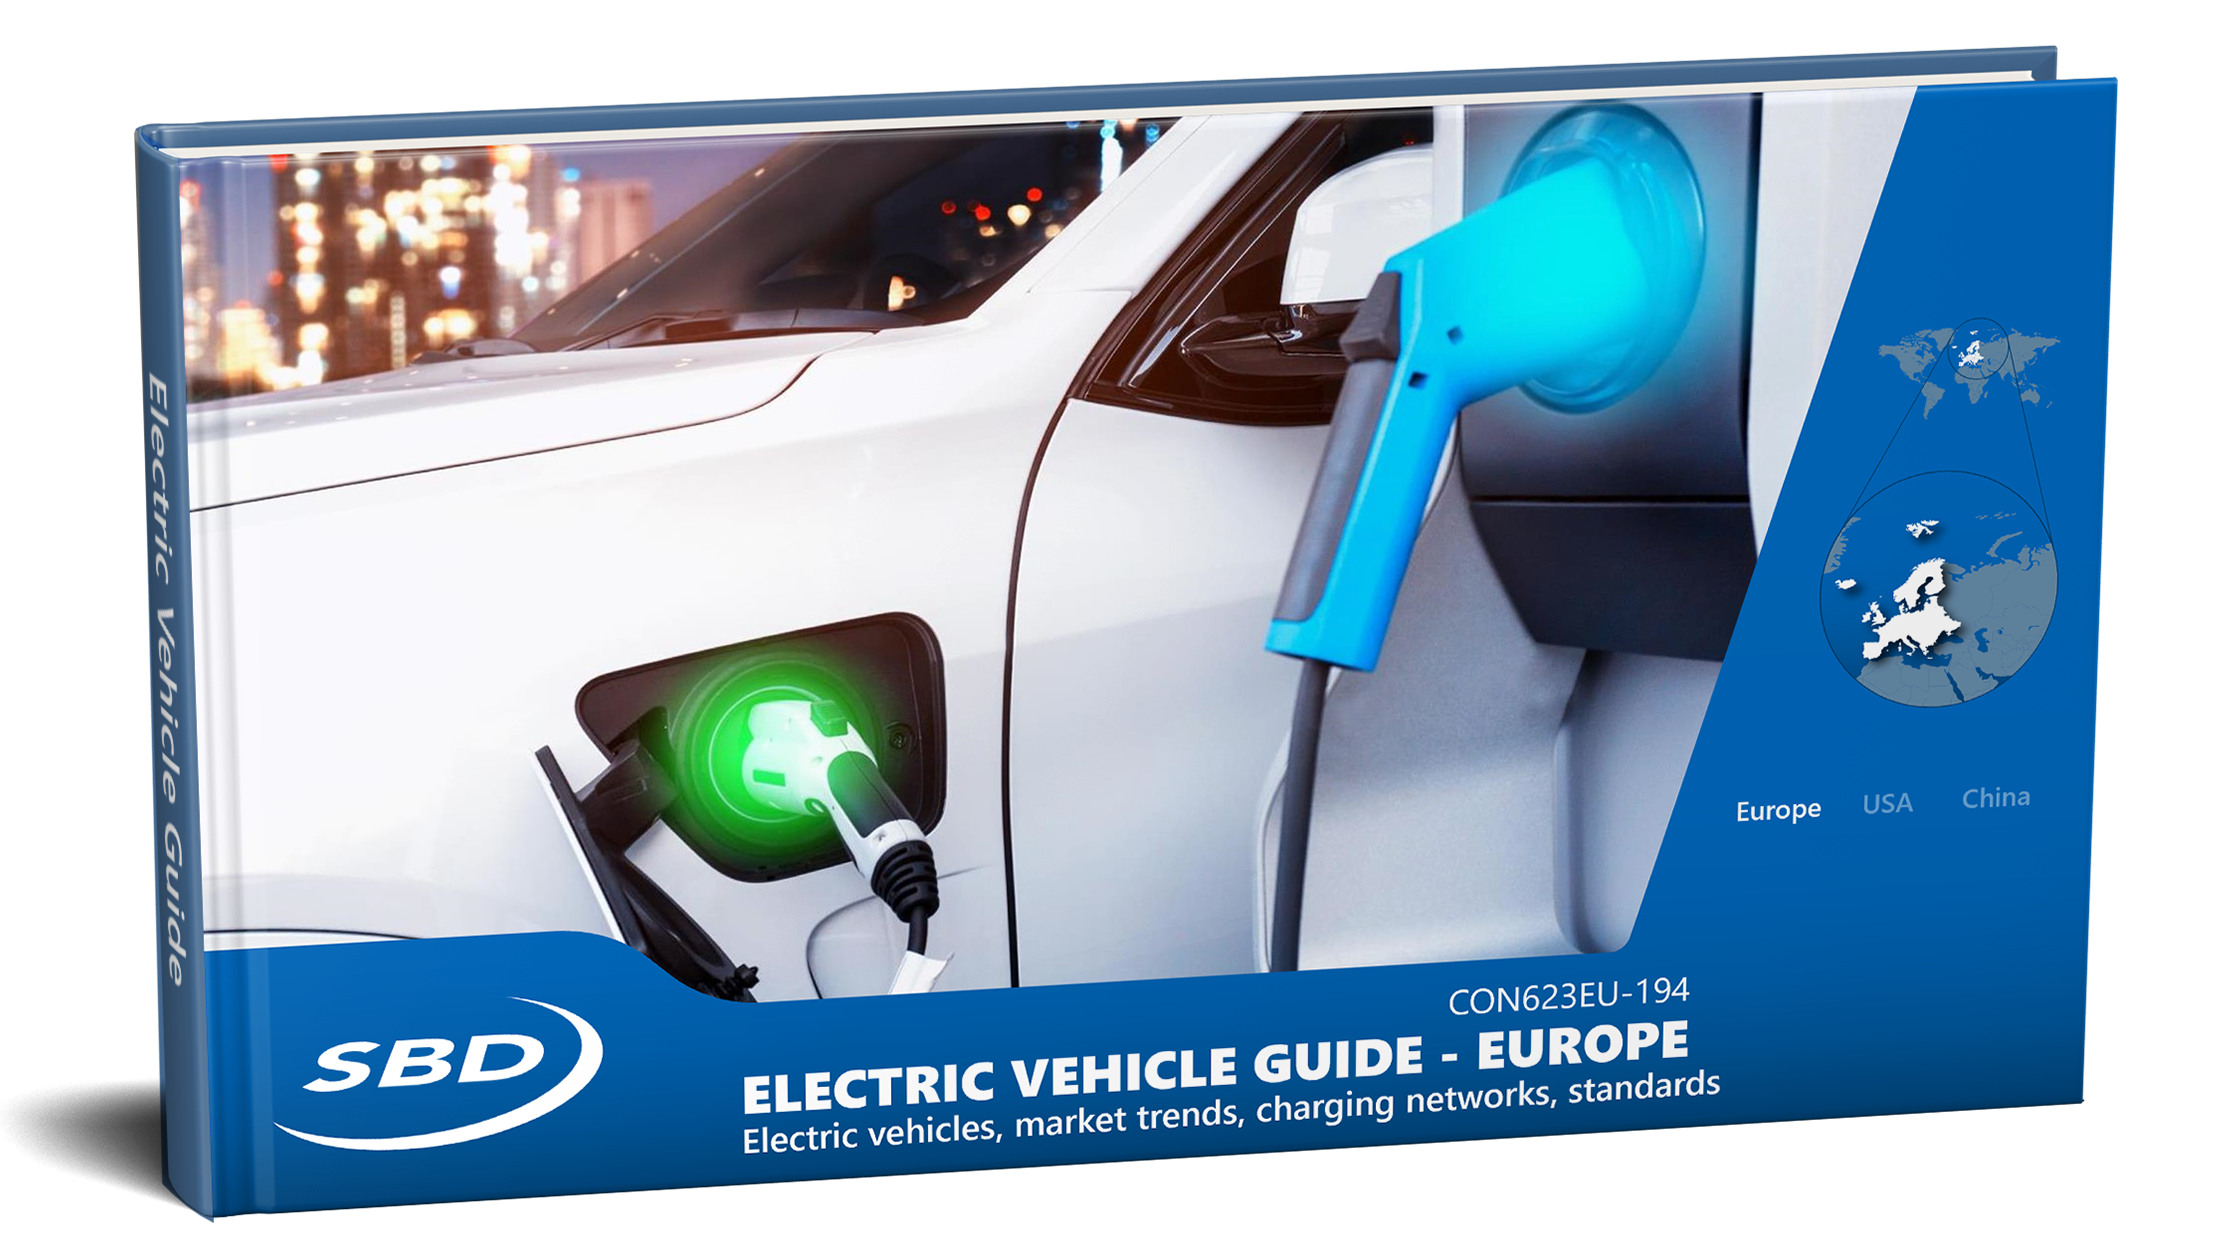 The Electric Vehicle Guide Research report series